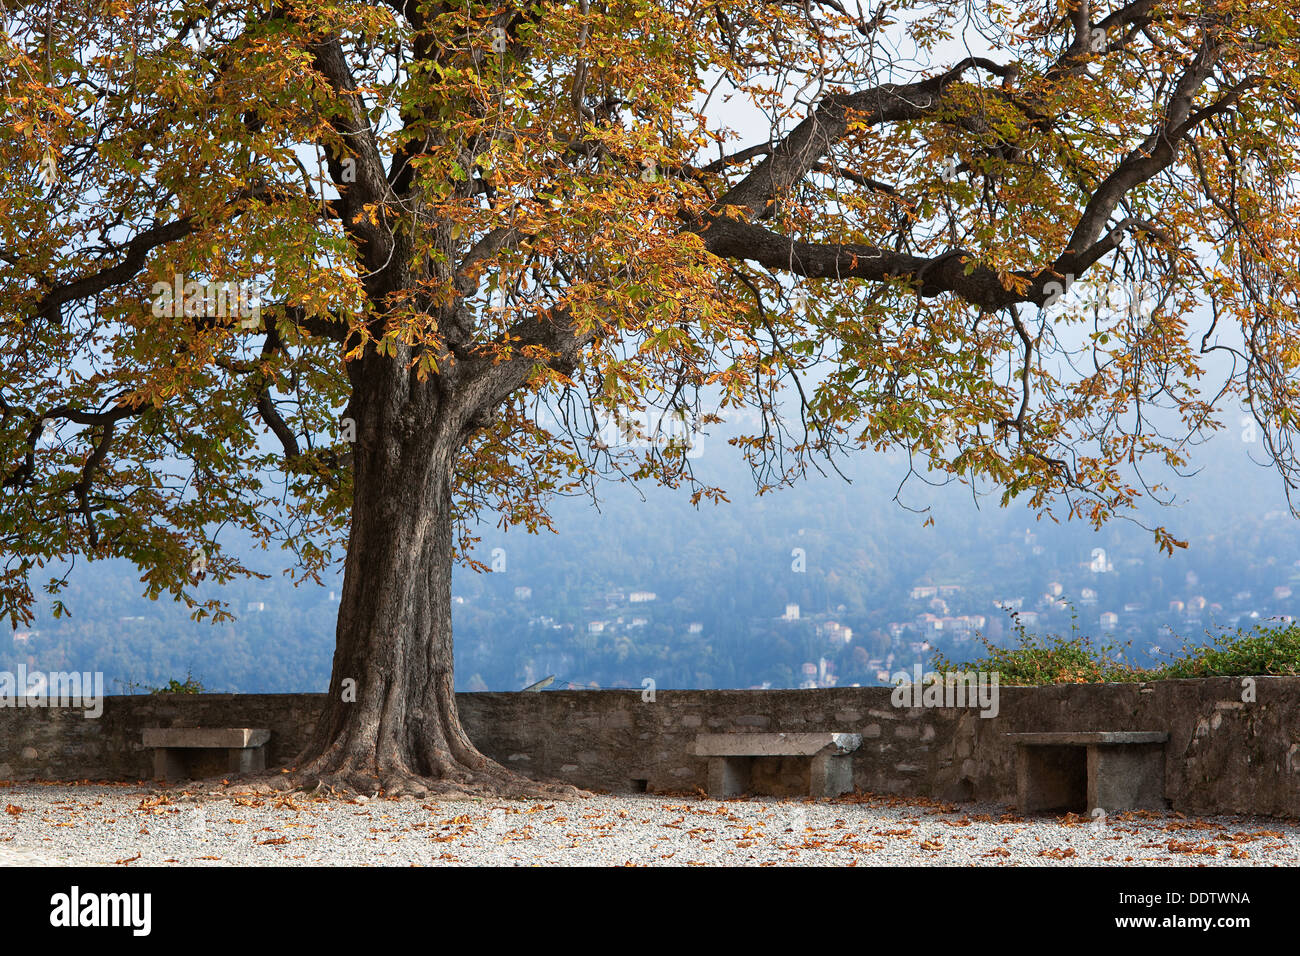 Beautiful old horsechestnut tree in autumn splendour beside stone wall with town across Lake Como visible on misty fall afternoo Stock Photo